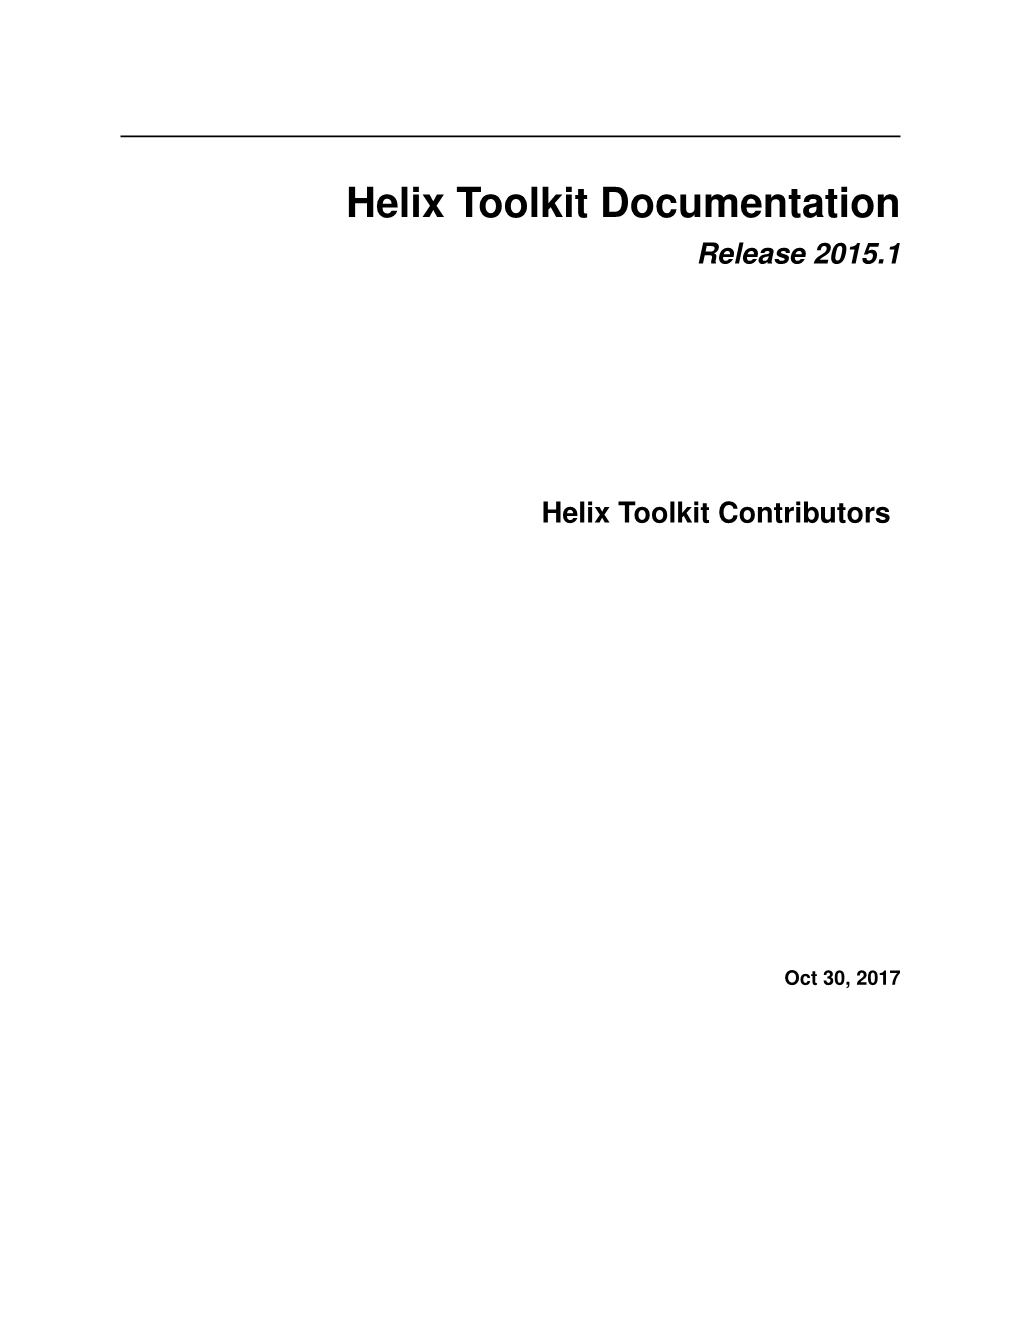 Helix Toolkit Documentation Release 2015.1